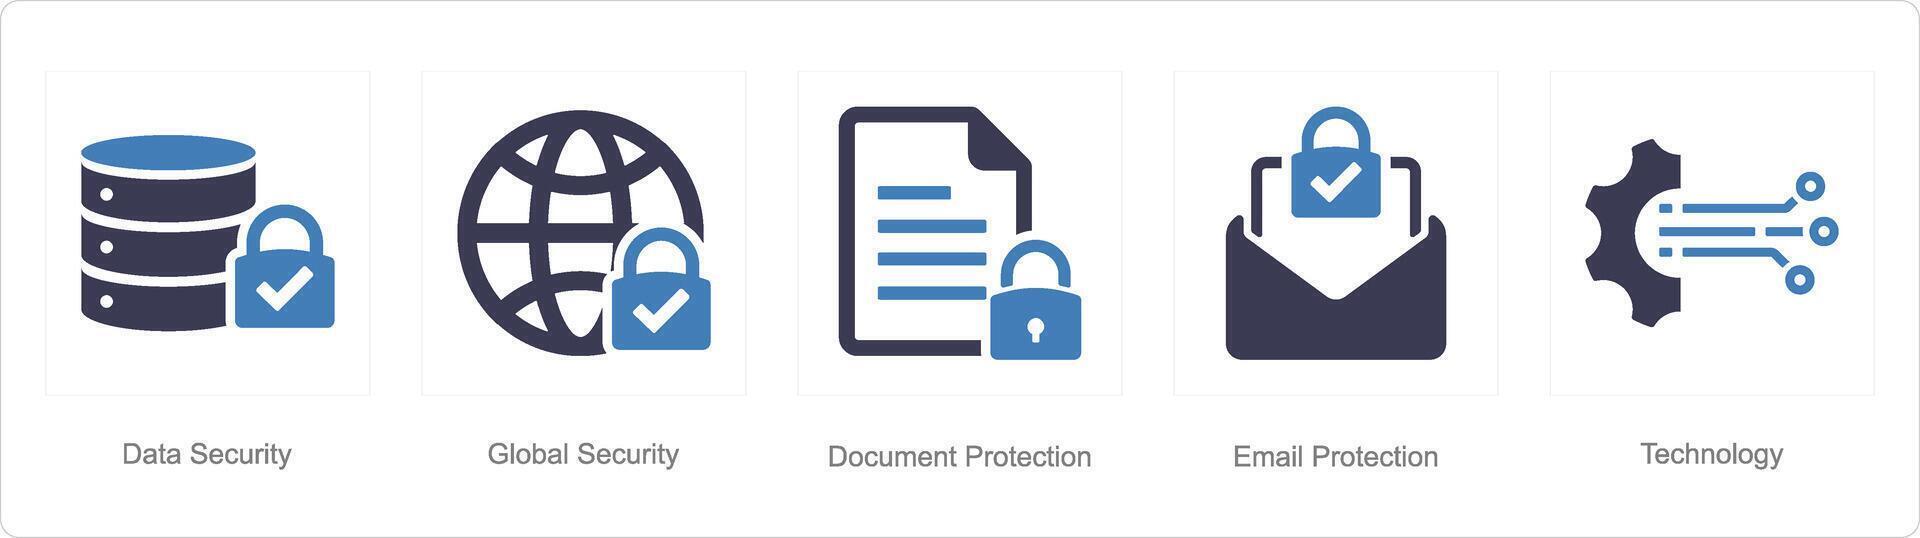 A set of 5 Cyber Security icons as data security, global security, document protection vector